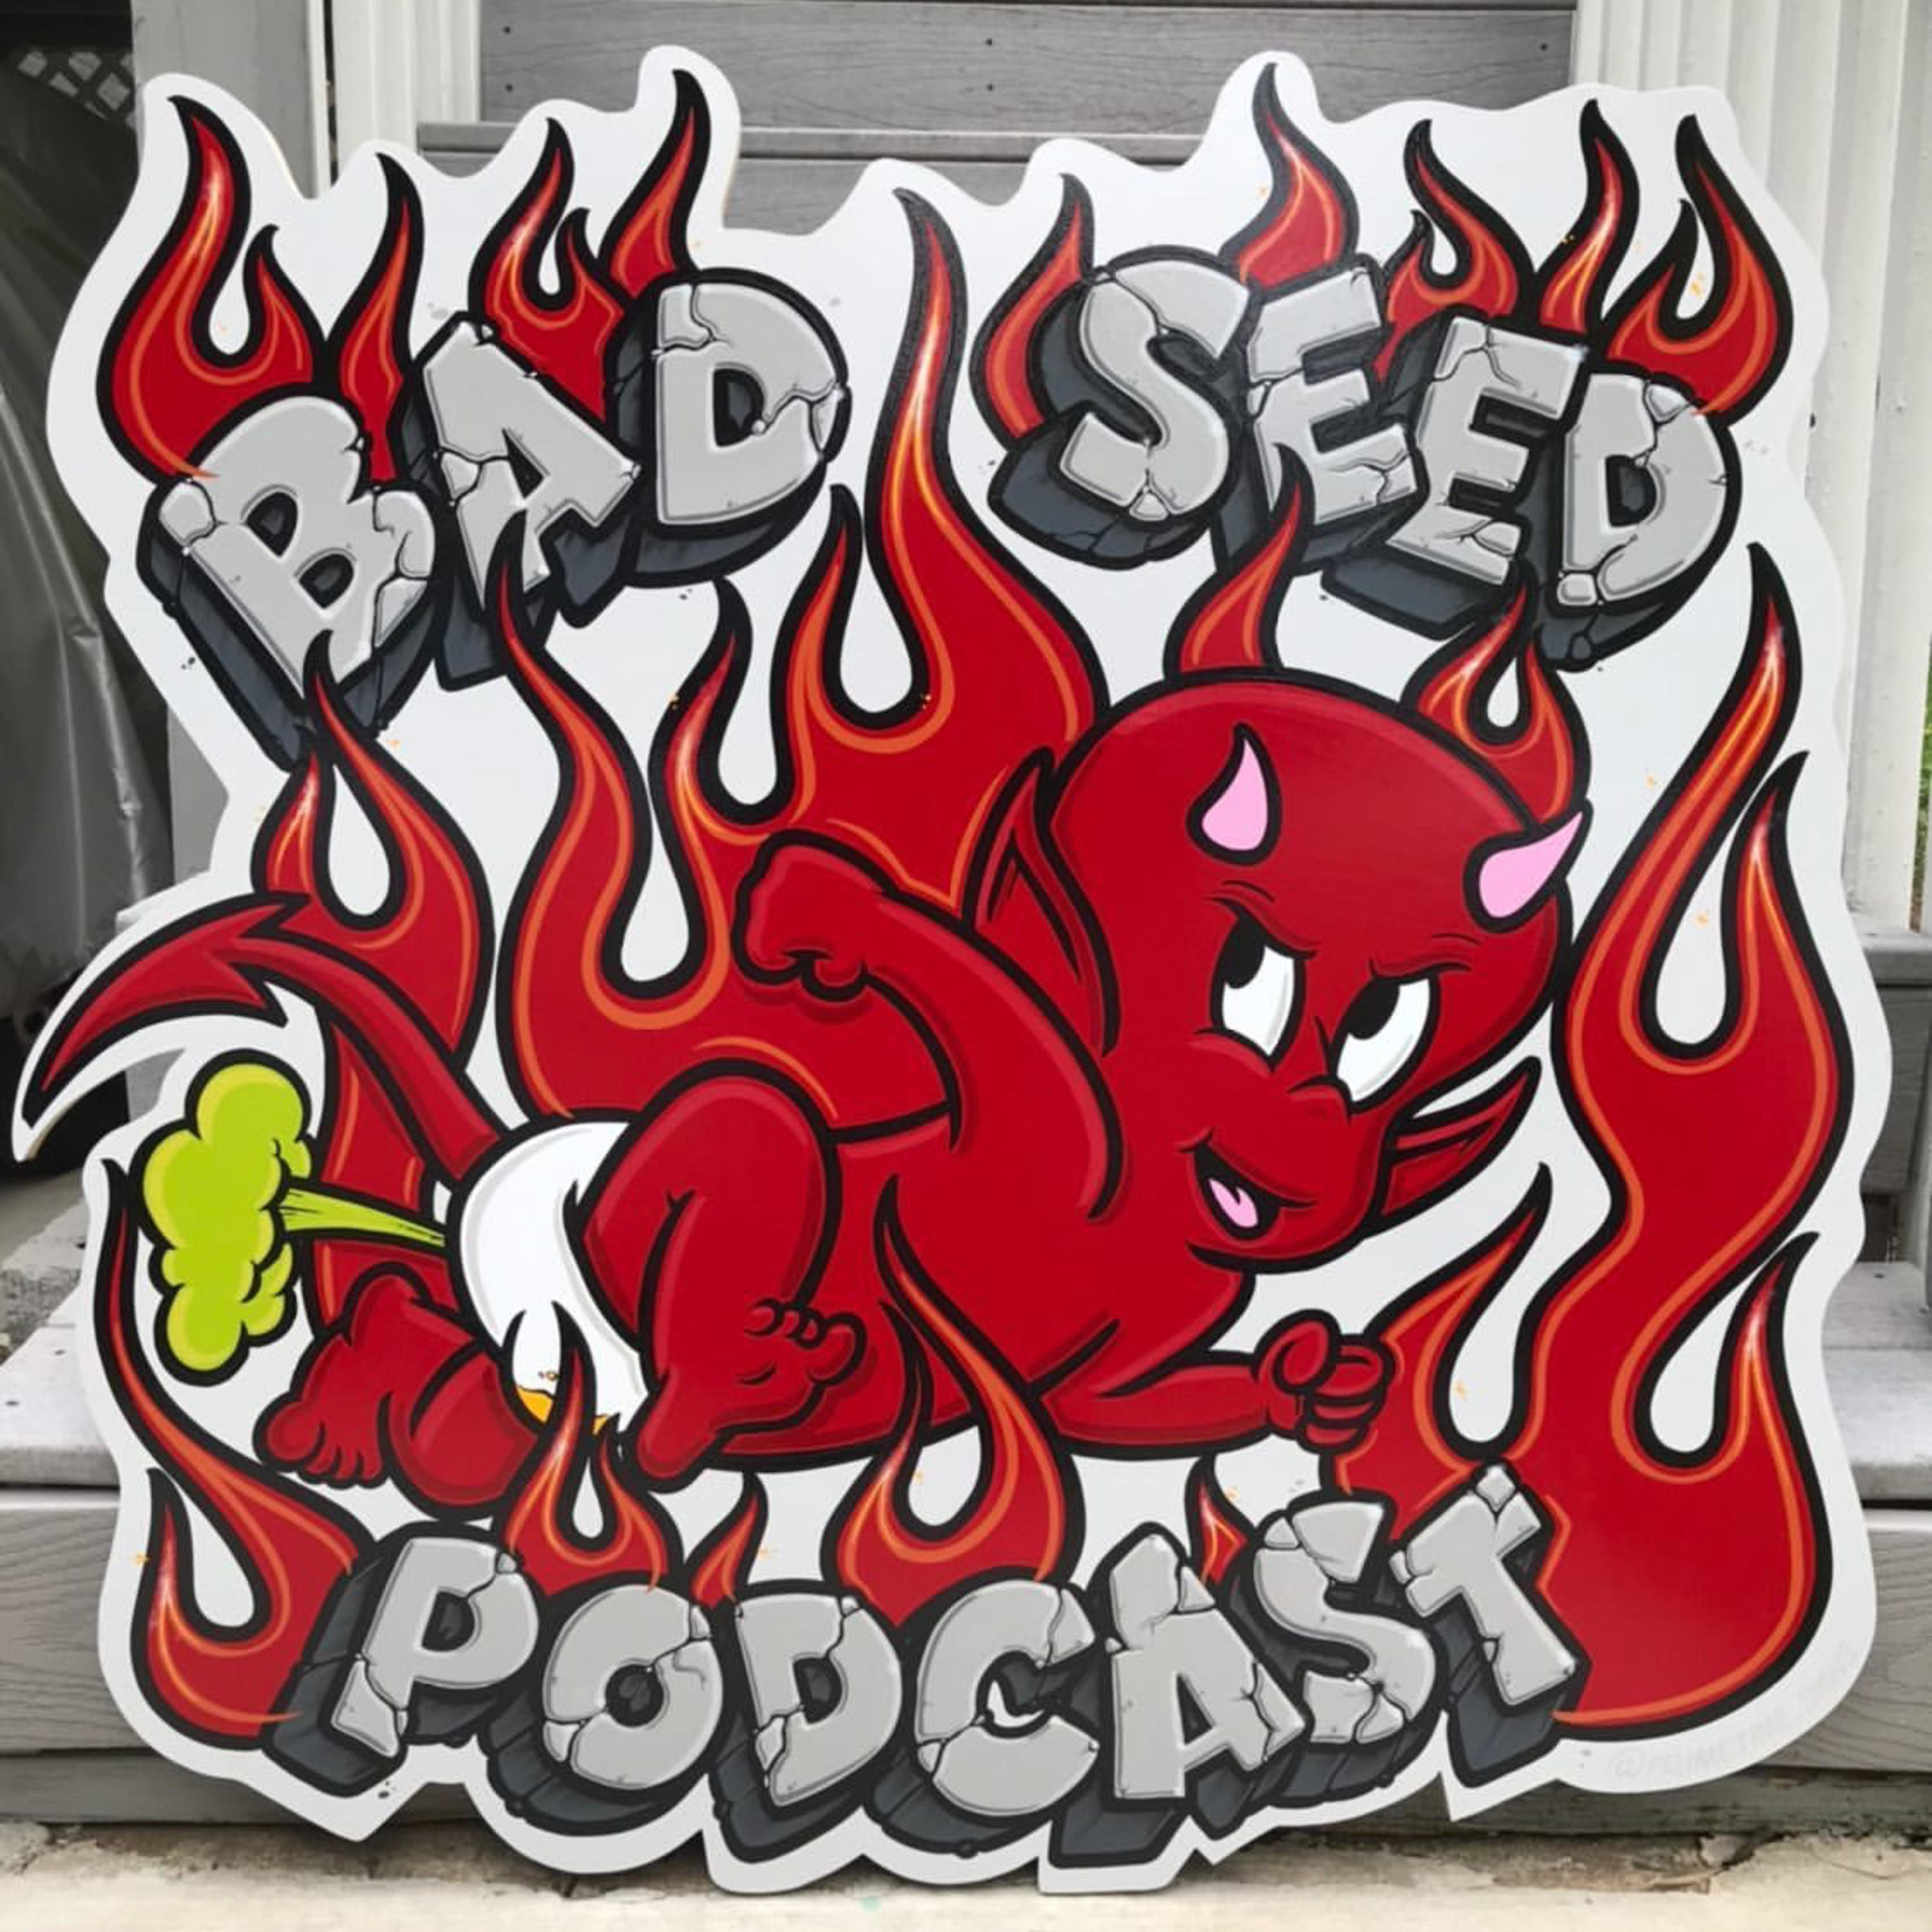 The Bad Seed Podcast